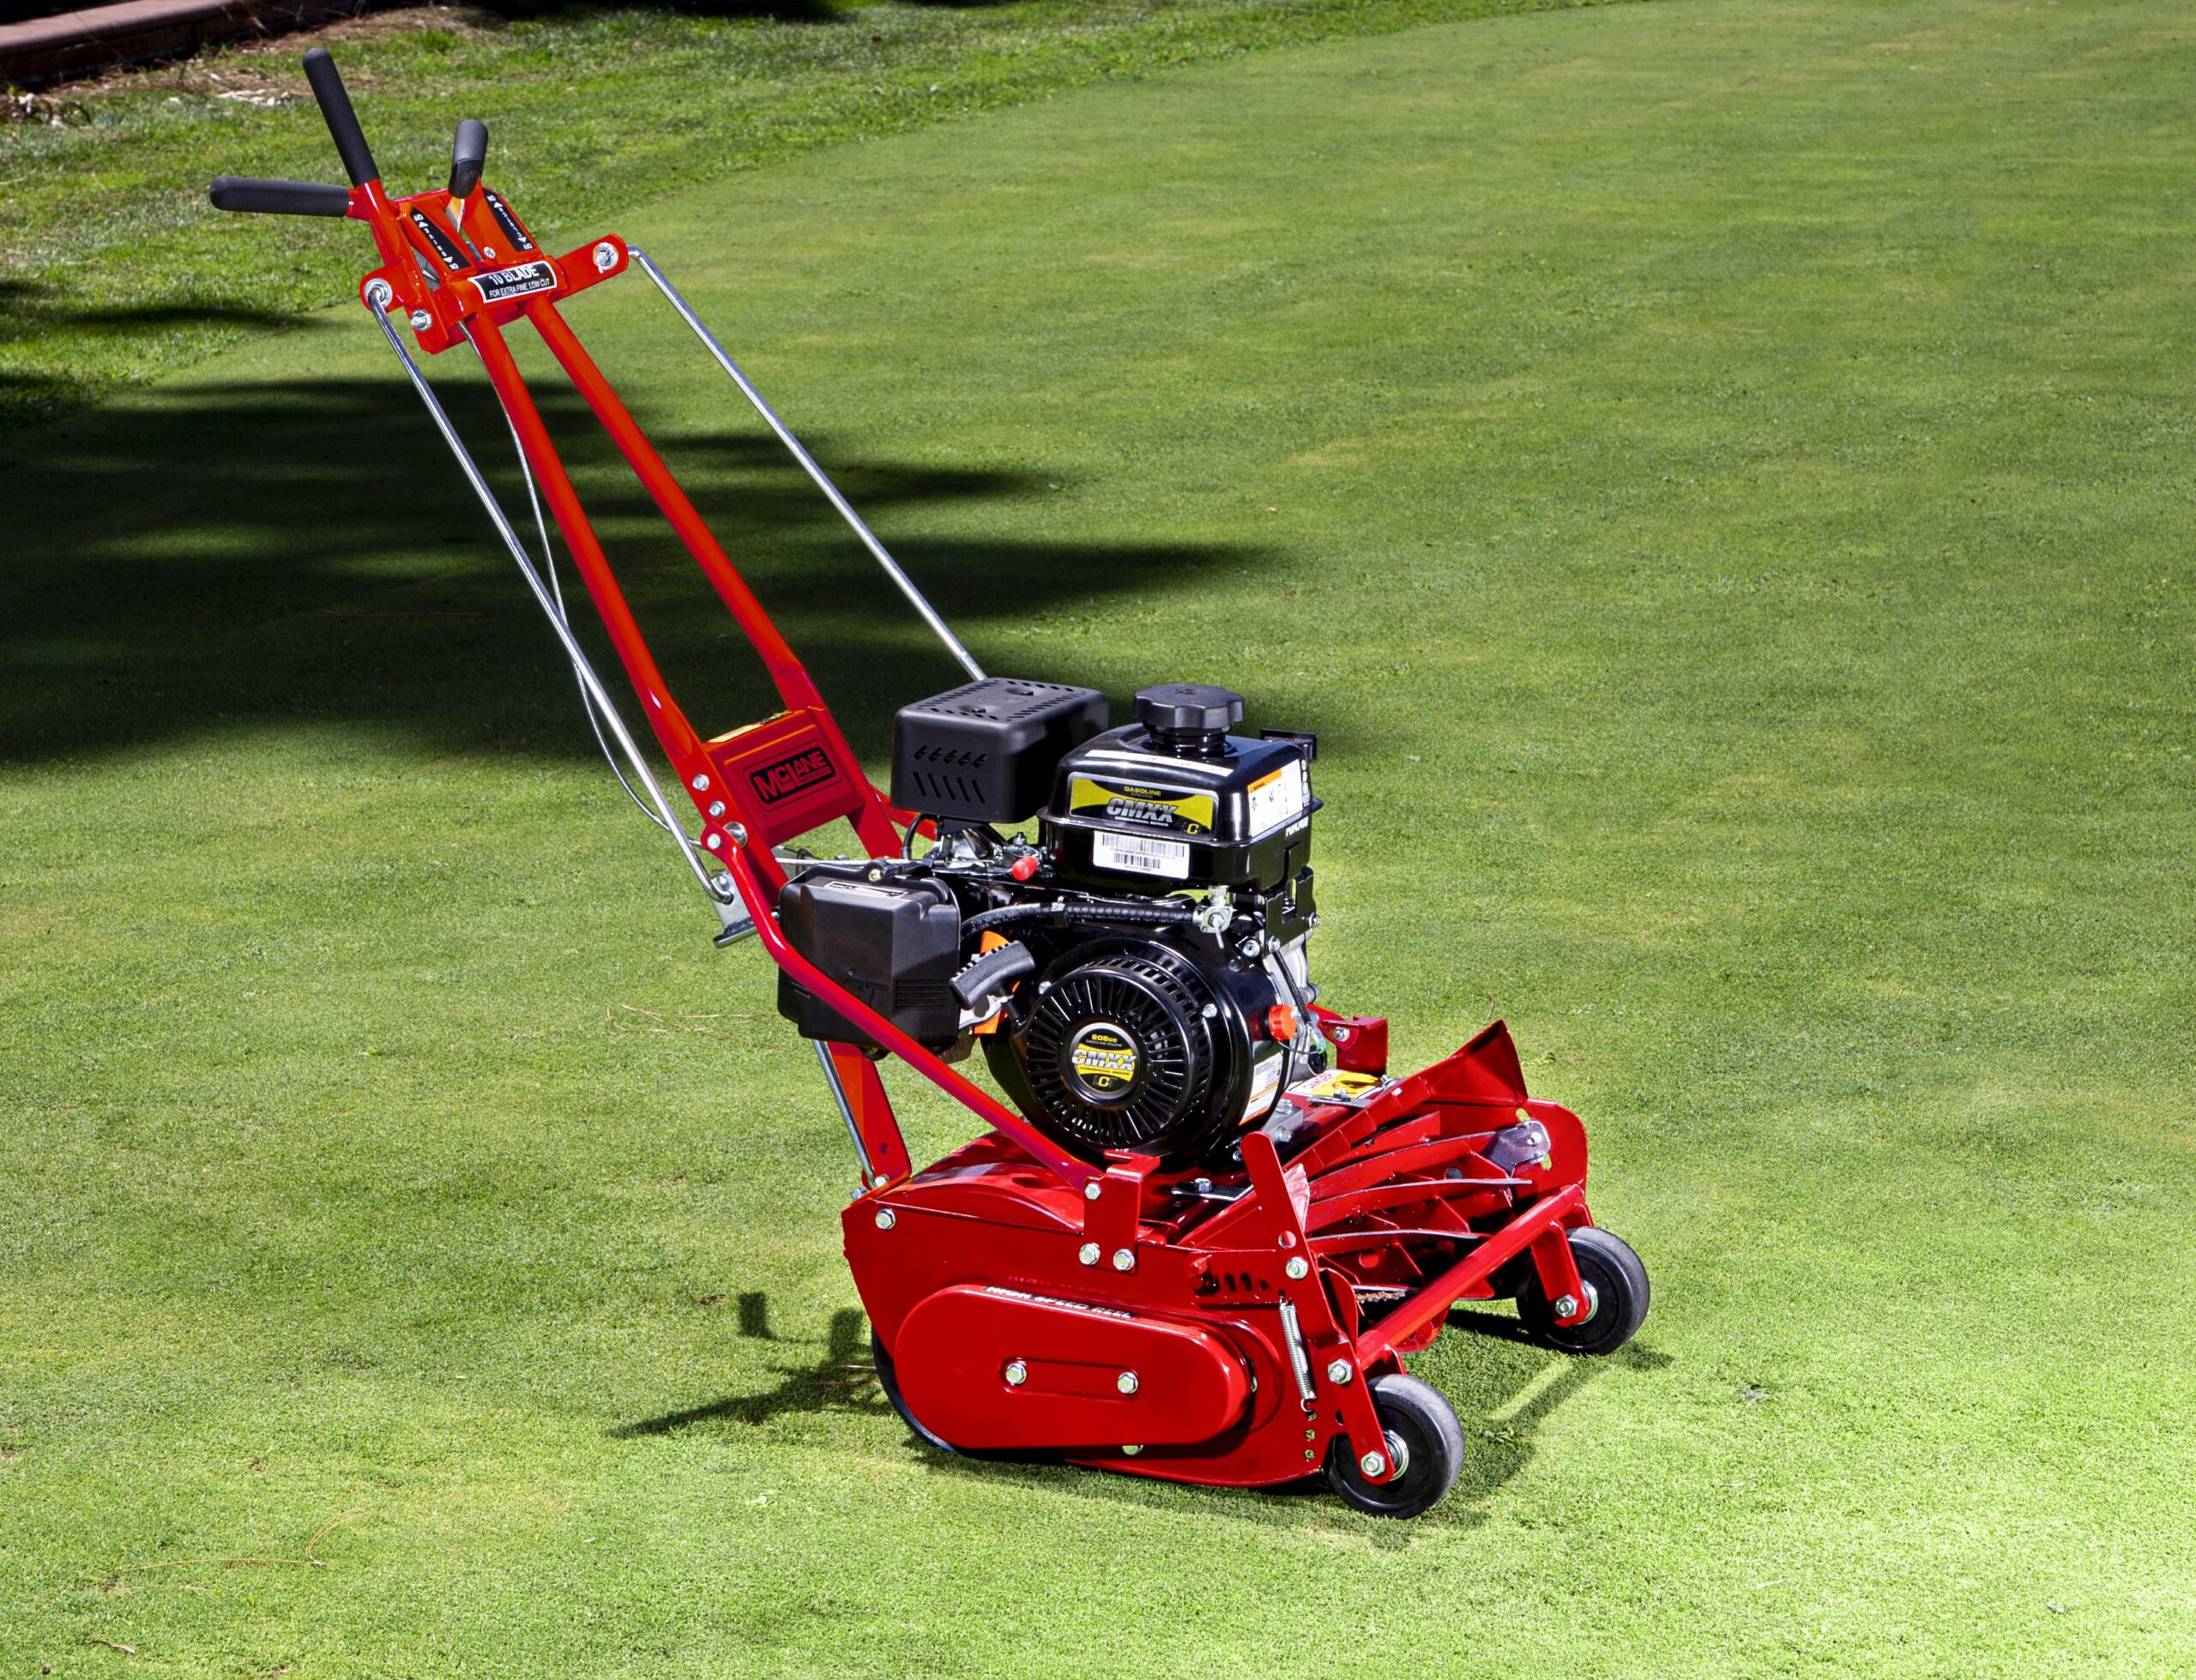 25 Reel Mower Red Version (SPRING SPECIAL, LOWEST PRICE EVER!)